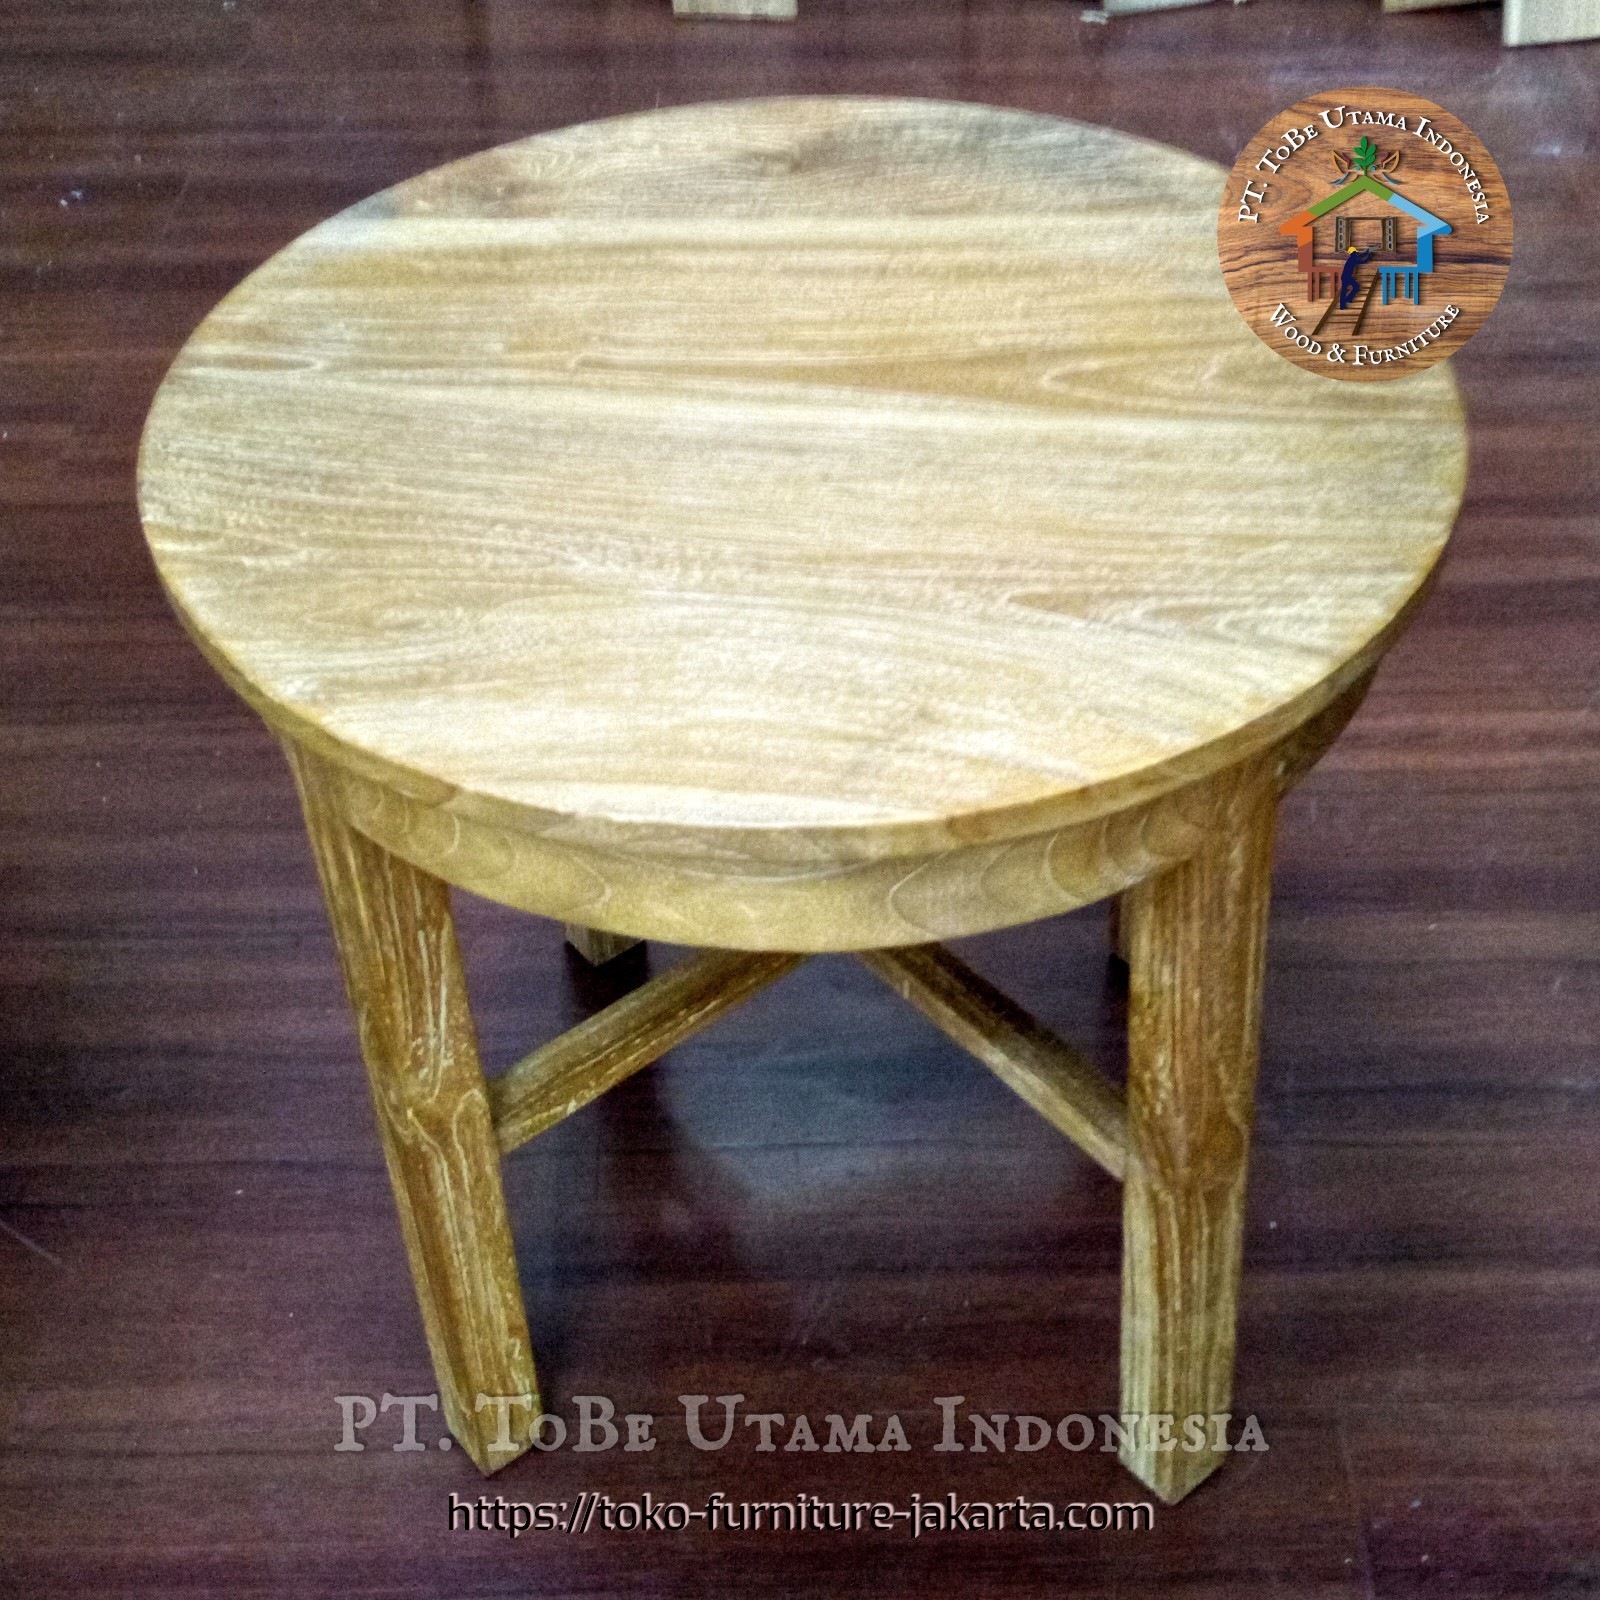 Living Room - Coffee Tables: Rustic Round Coffee Table made of teakwood (image 1 of 1).